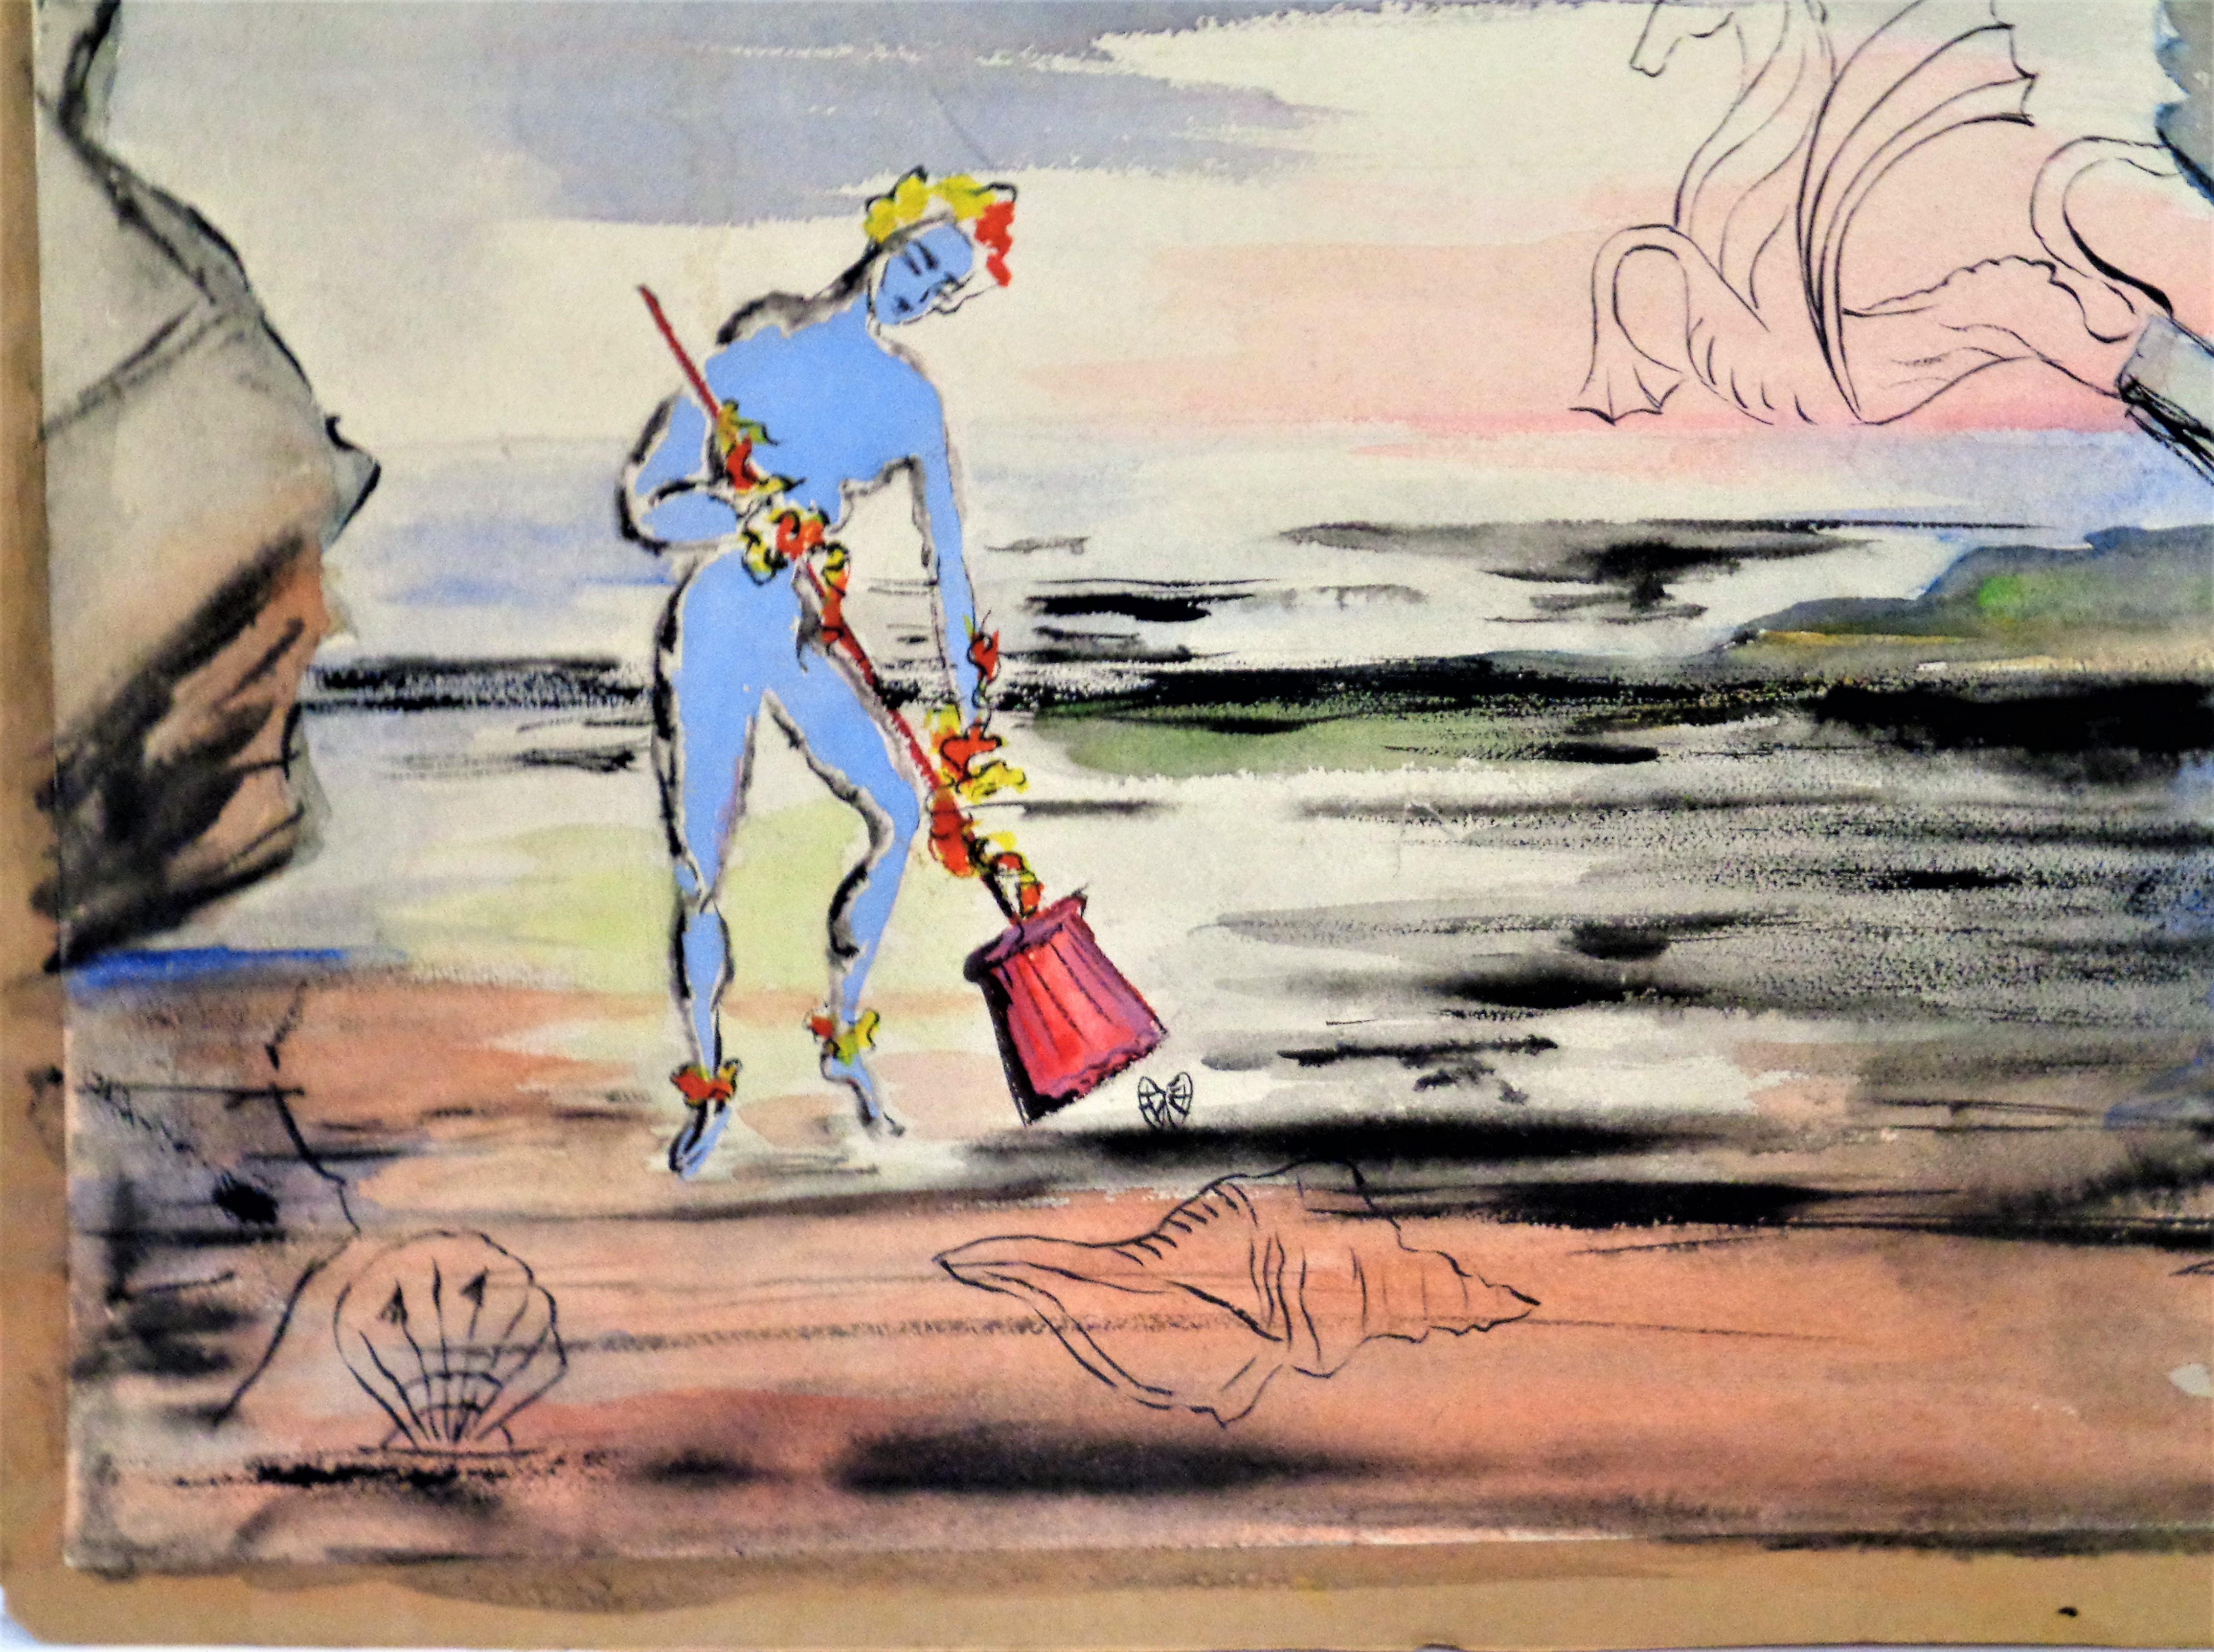 Surrealistic fantasy watercolor painting on paper - seascape with blue female figure and mythological flying winged seahorse. Some indistinct writing along bottom. Possibly a study for a set design. In the style of Salvador Dali. Circa 1940-1960.